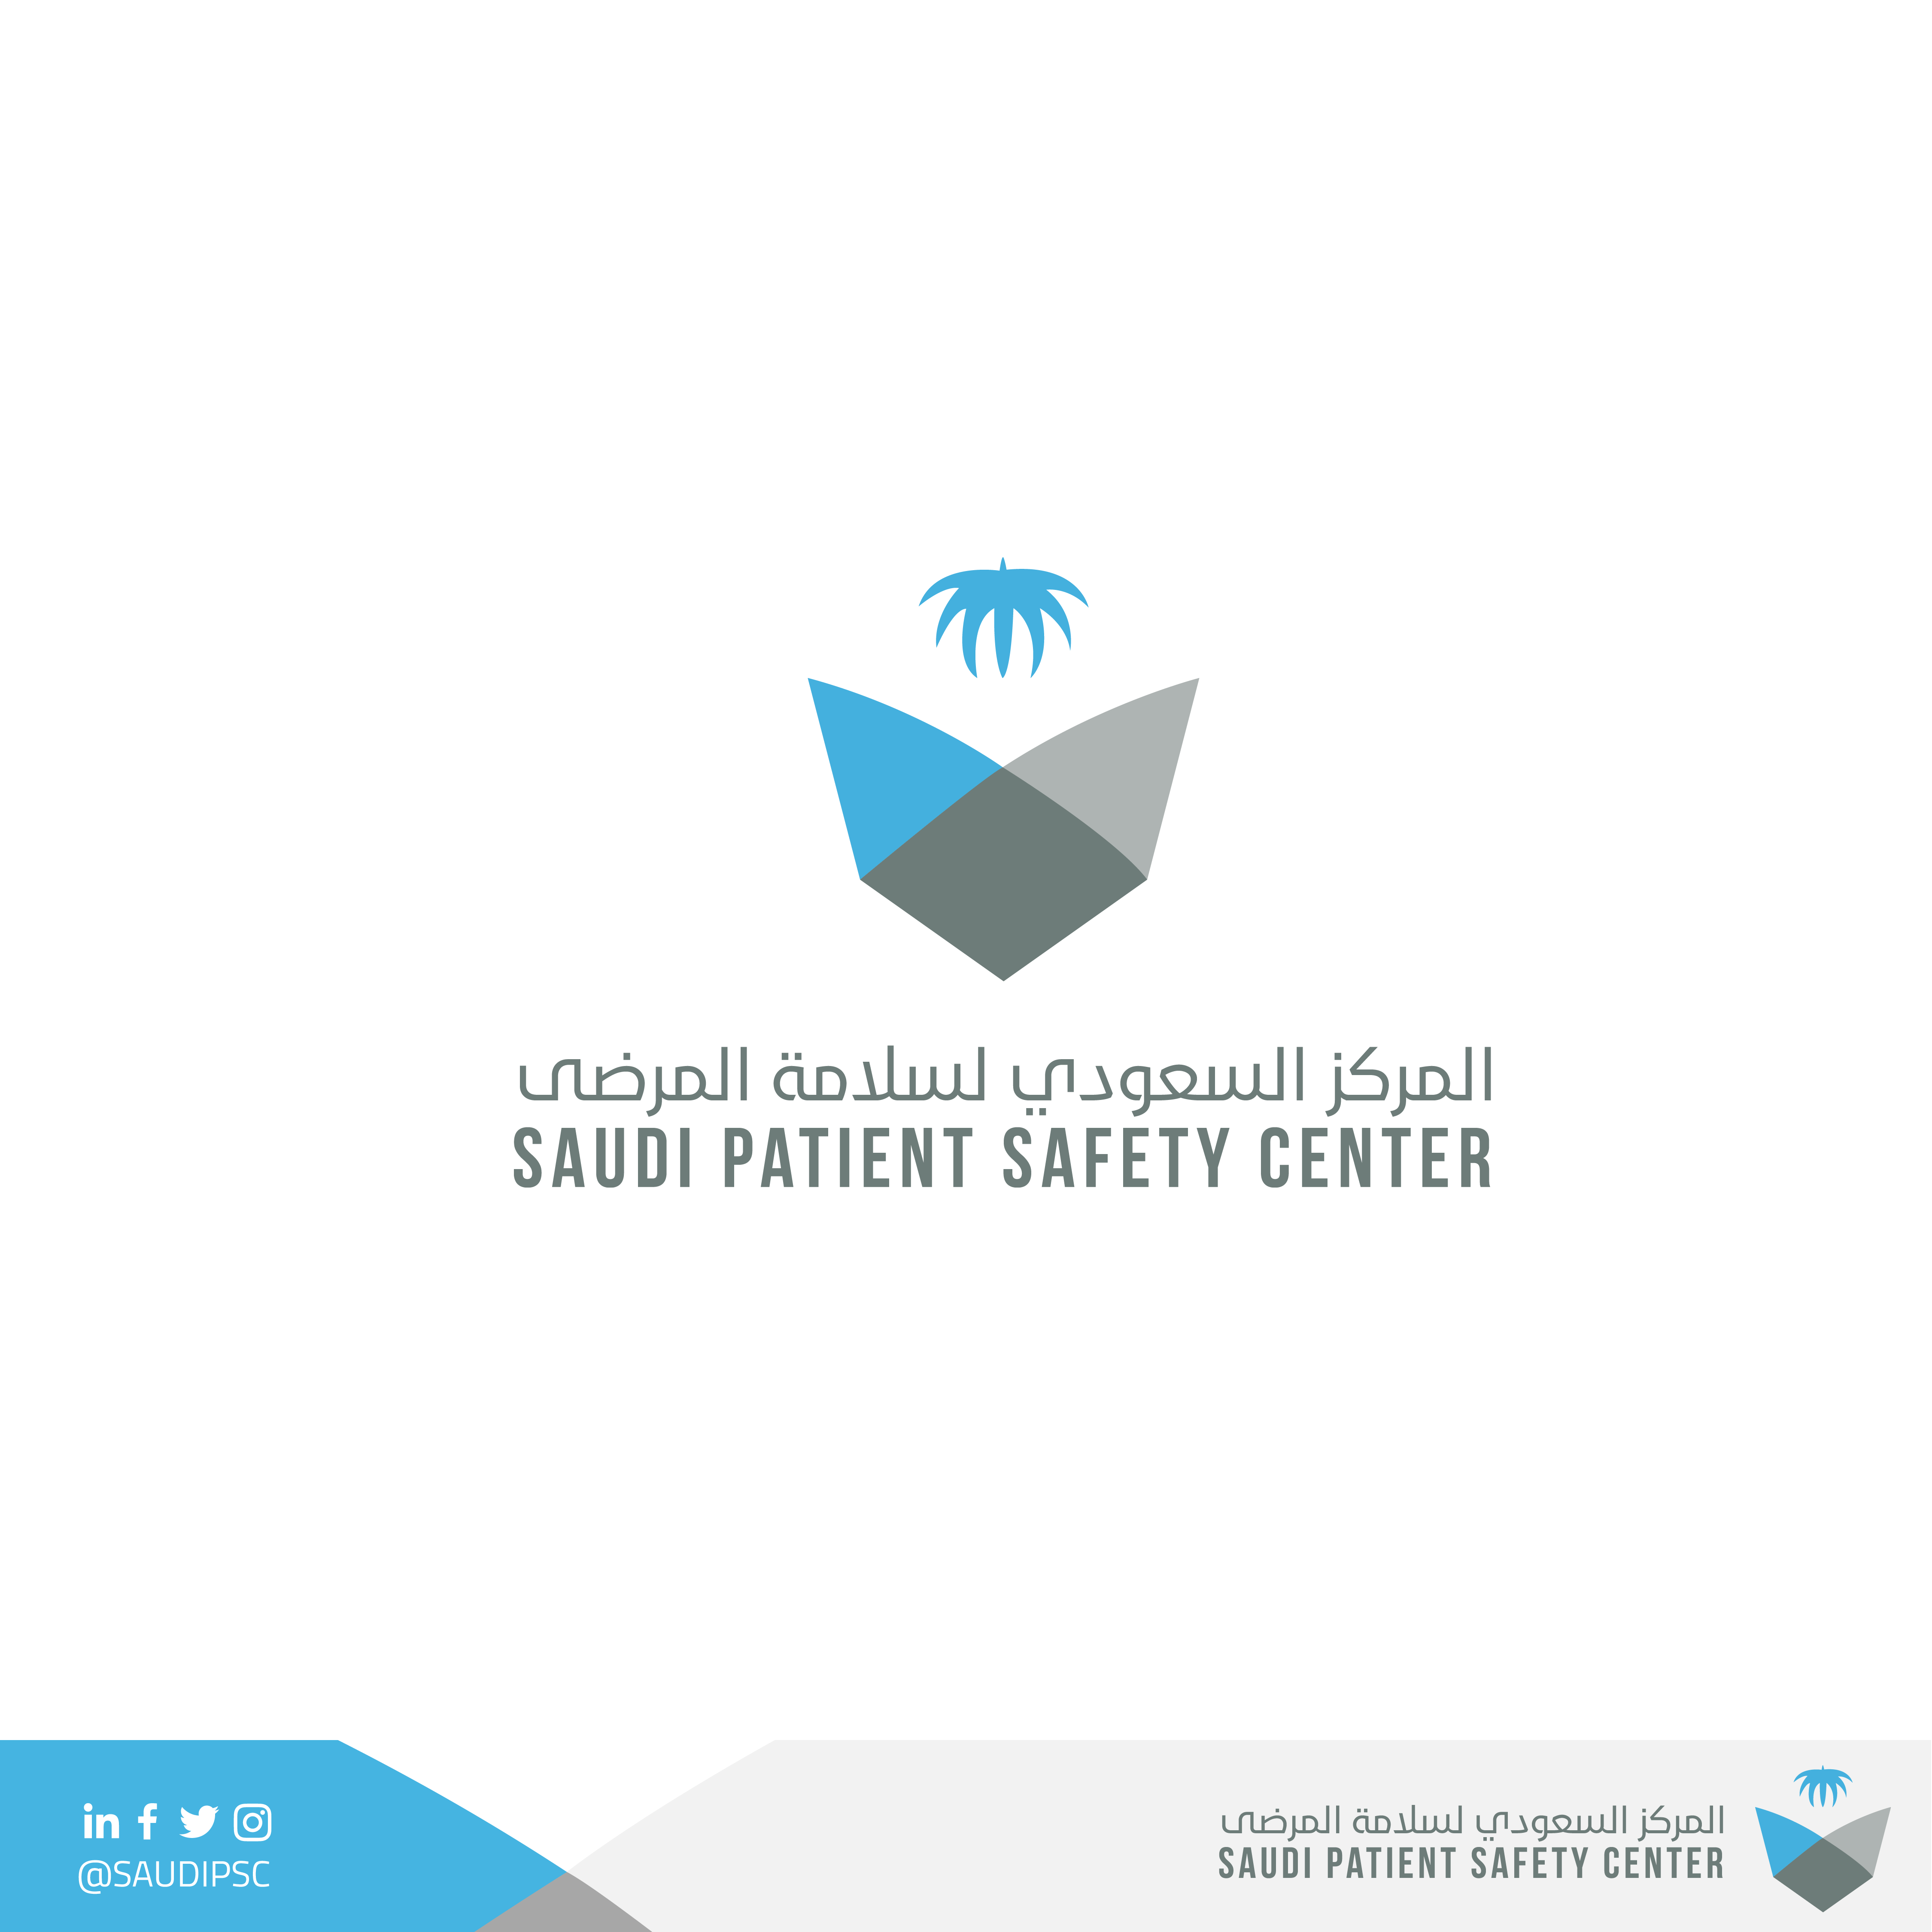 The Saudi Patient Safety Center held its first symposium on patient safety culture in the Eastern Province